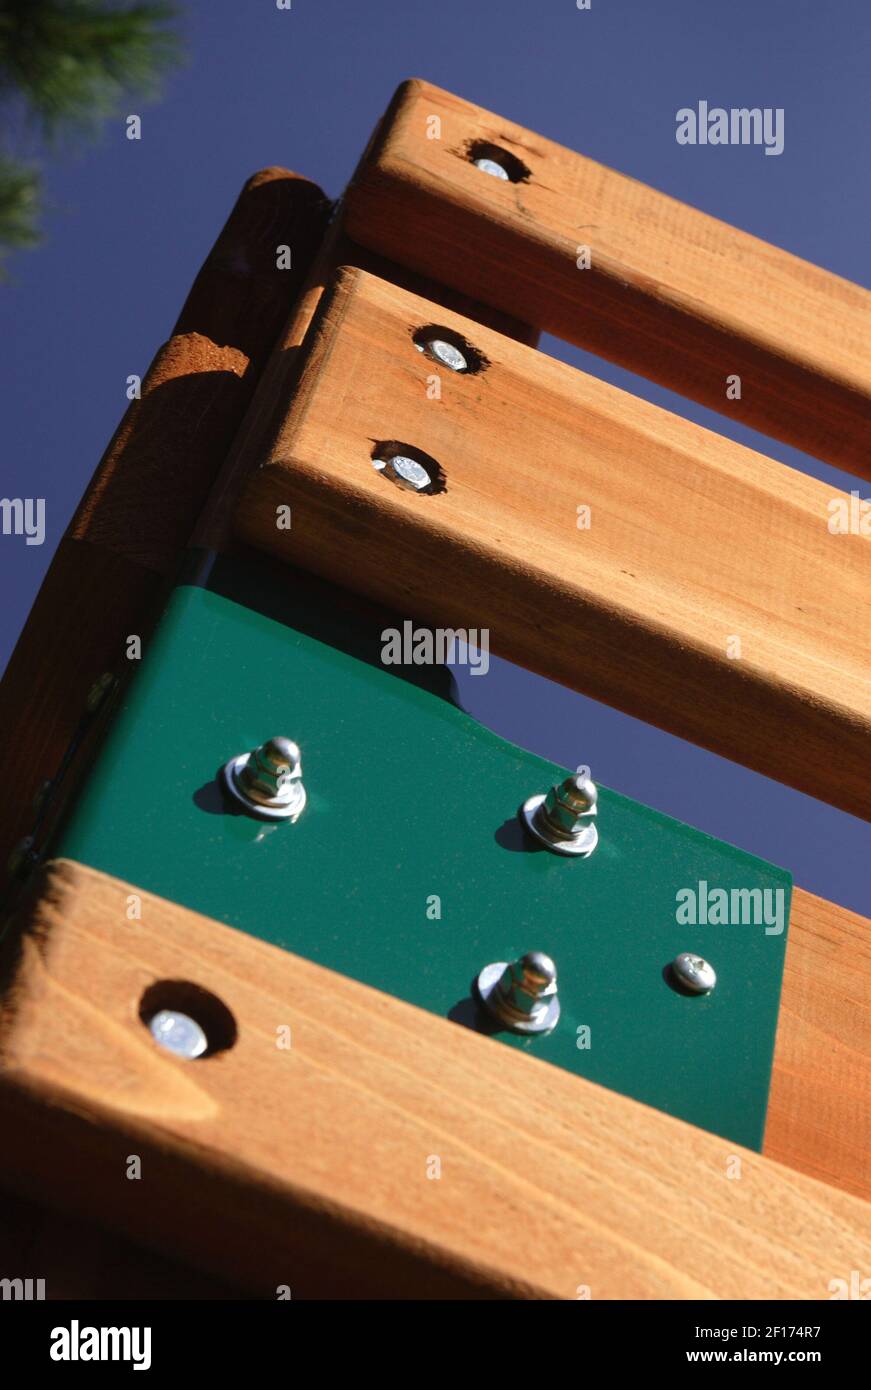 When looking for a wooden play set make sure that major joints are reinforced with metal brackets and all bolts have rounded tops or are recessed into the wood. (Photo by Chas Metivier/Orange County Register/KRT) Stock Photo